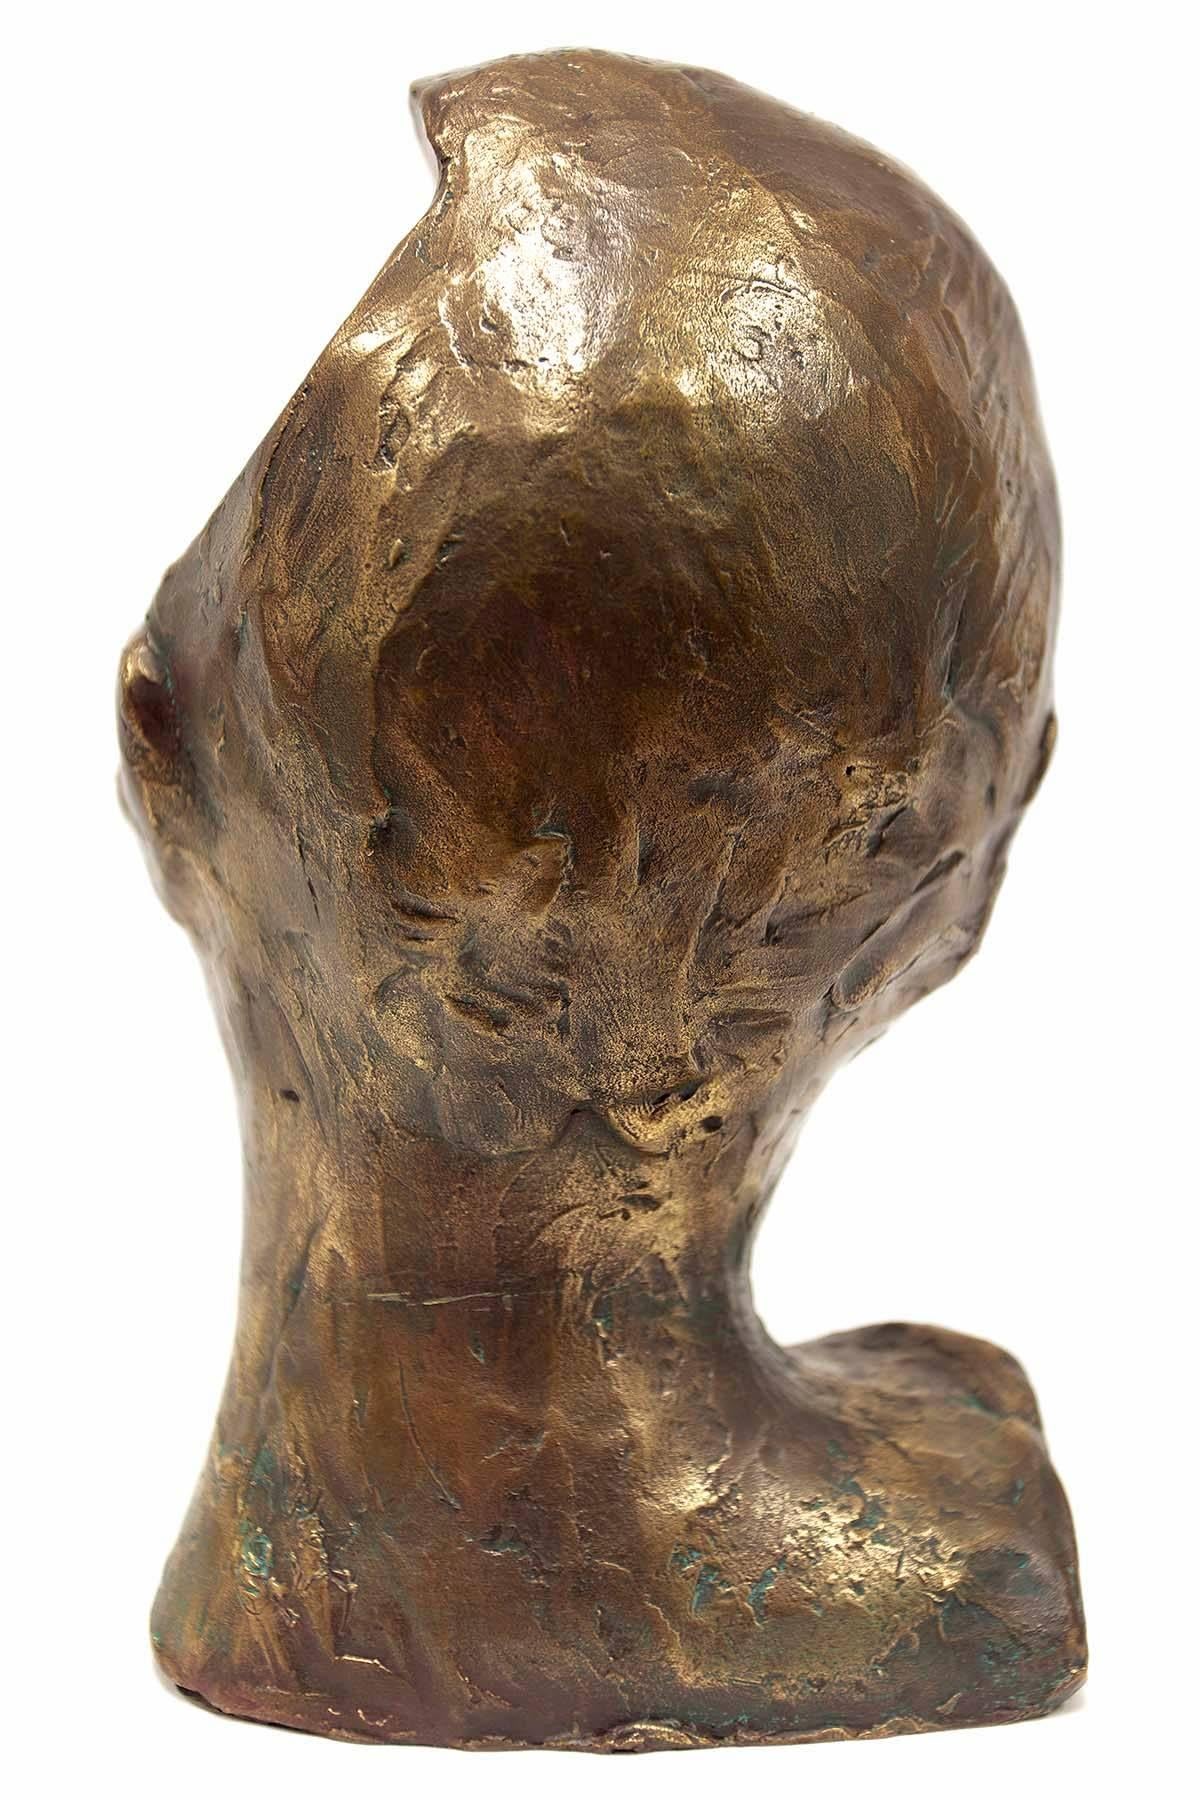 This is a bronze cast sculpture by Philip Pavia is part of his series of 